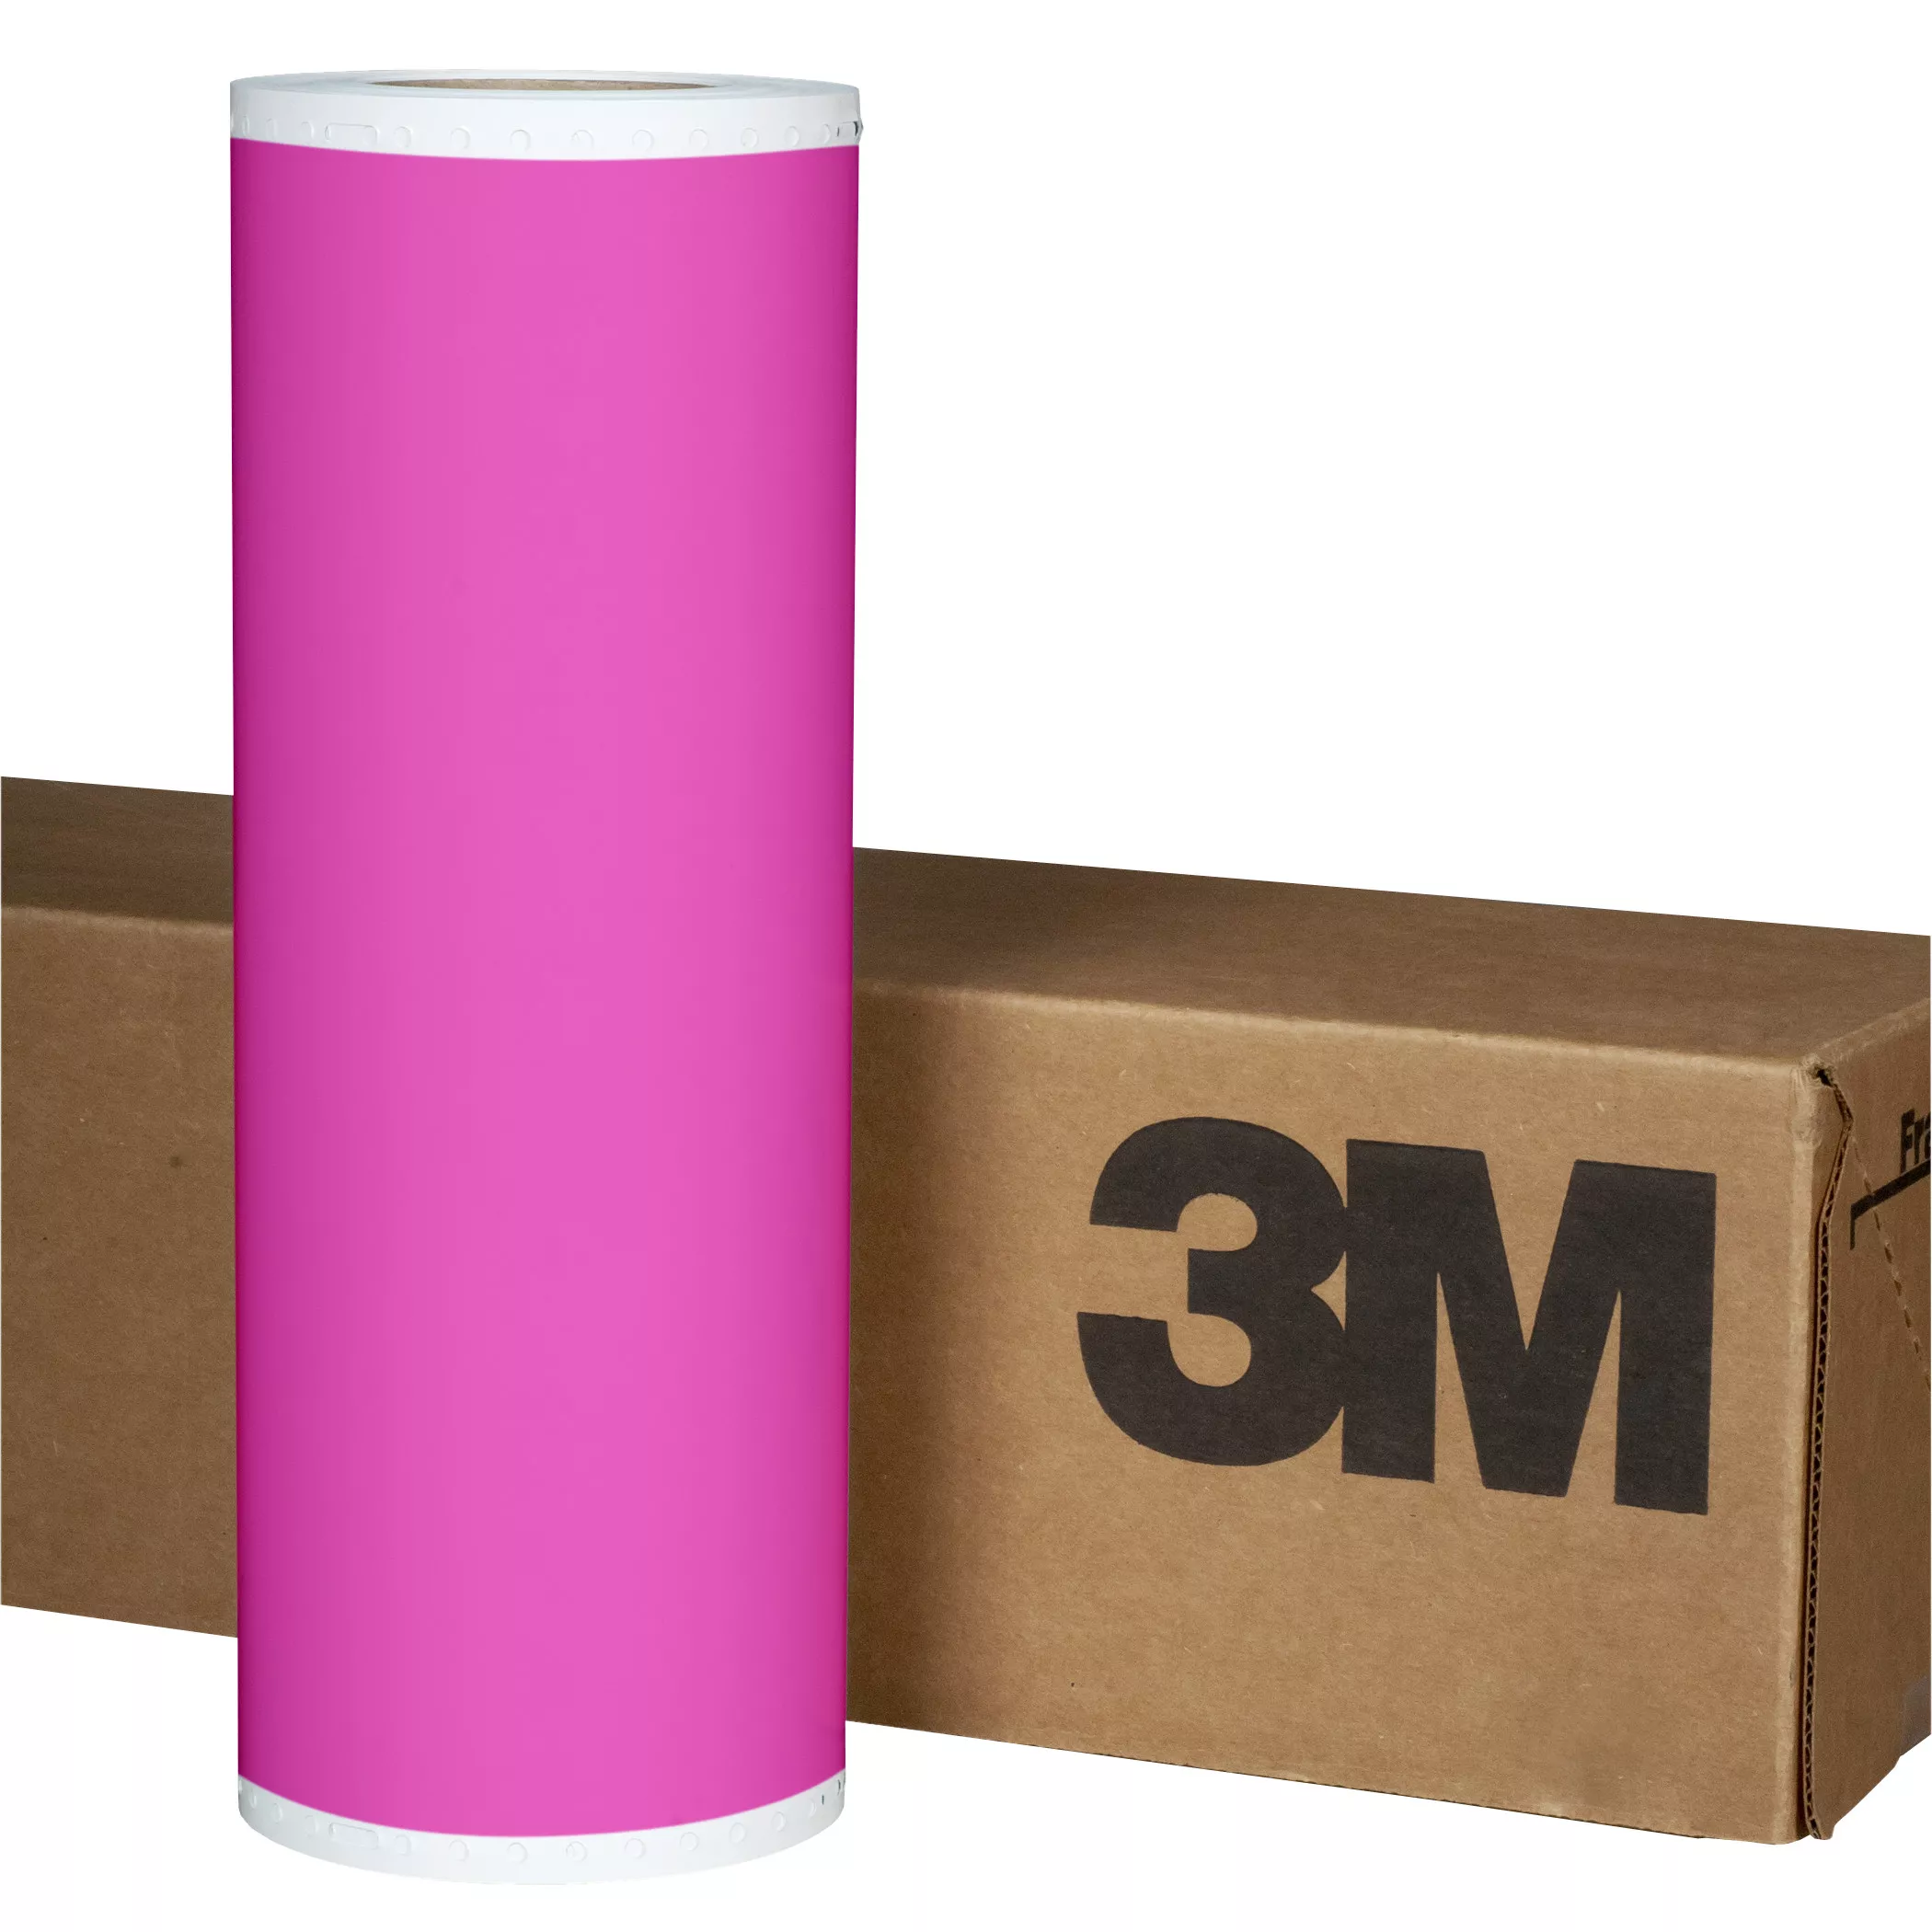 3M™ Scotchcal™ Translucent Graphic Film 3630-1091, Pink, 48 in x 50 yd